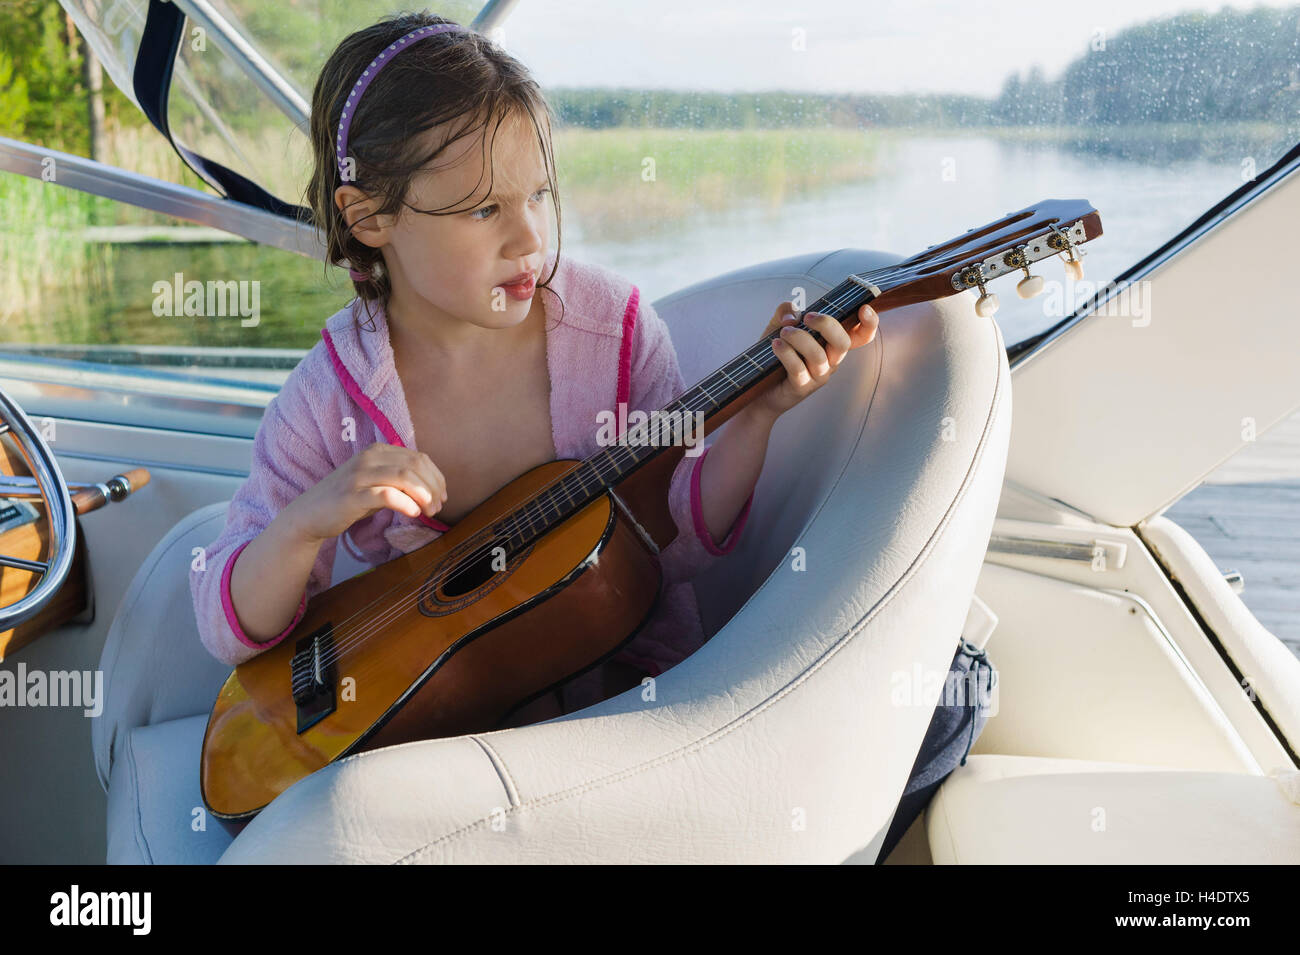 Girls in pink bathrobe sit on a boat and plays the guitar Stock Photo